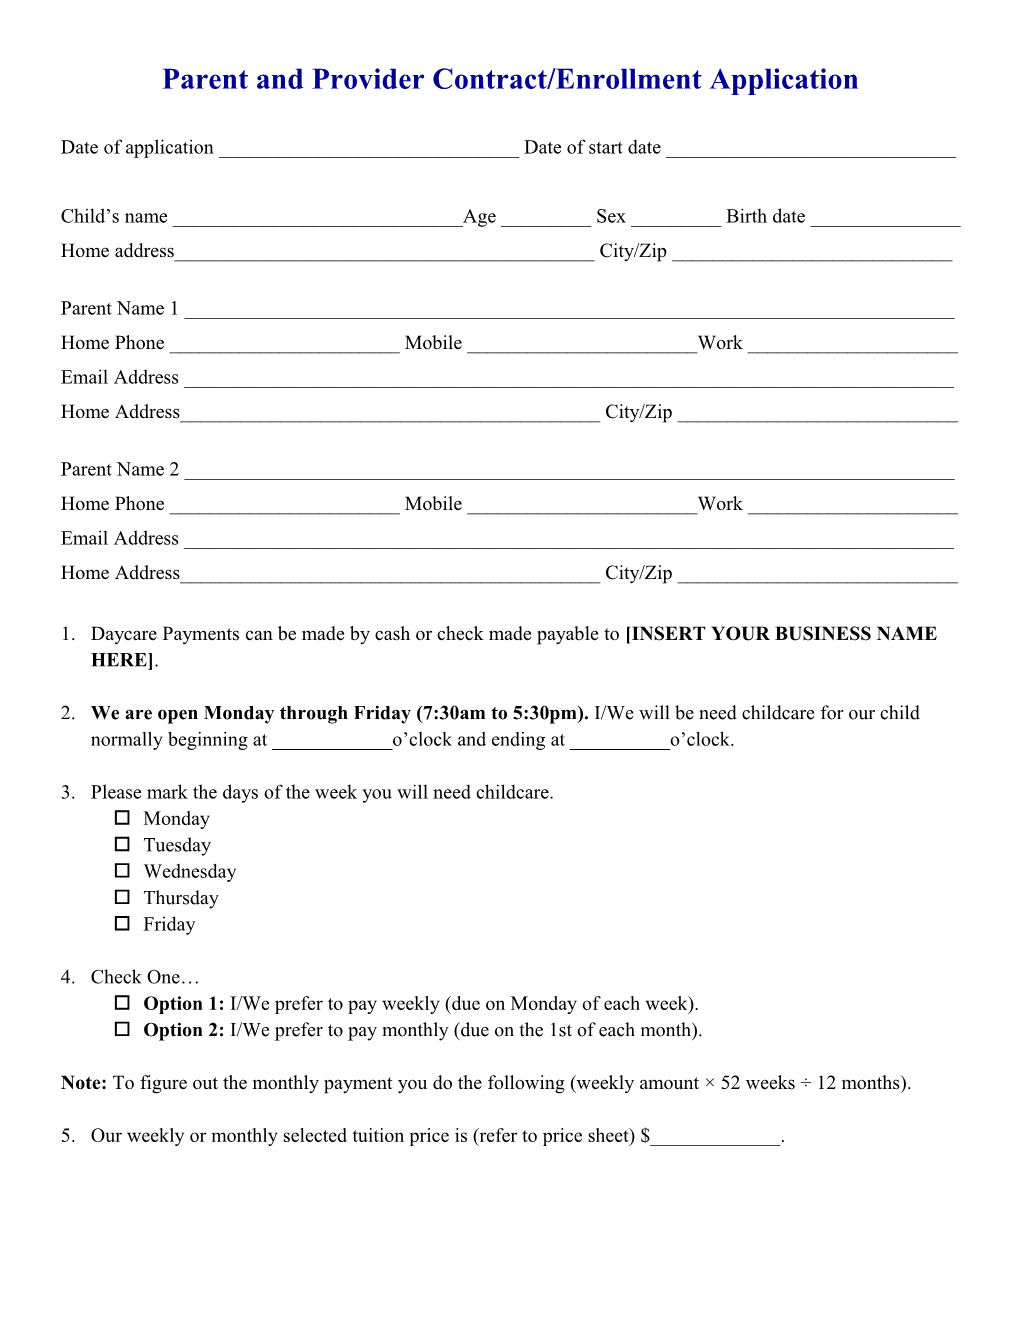 Provider and Parent Contract/Enrollment Application